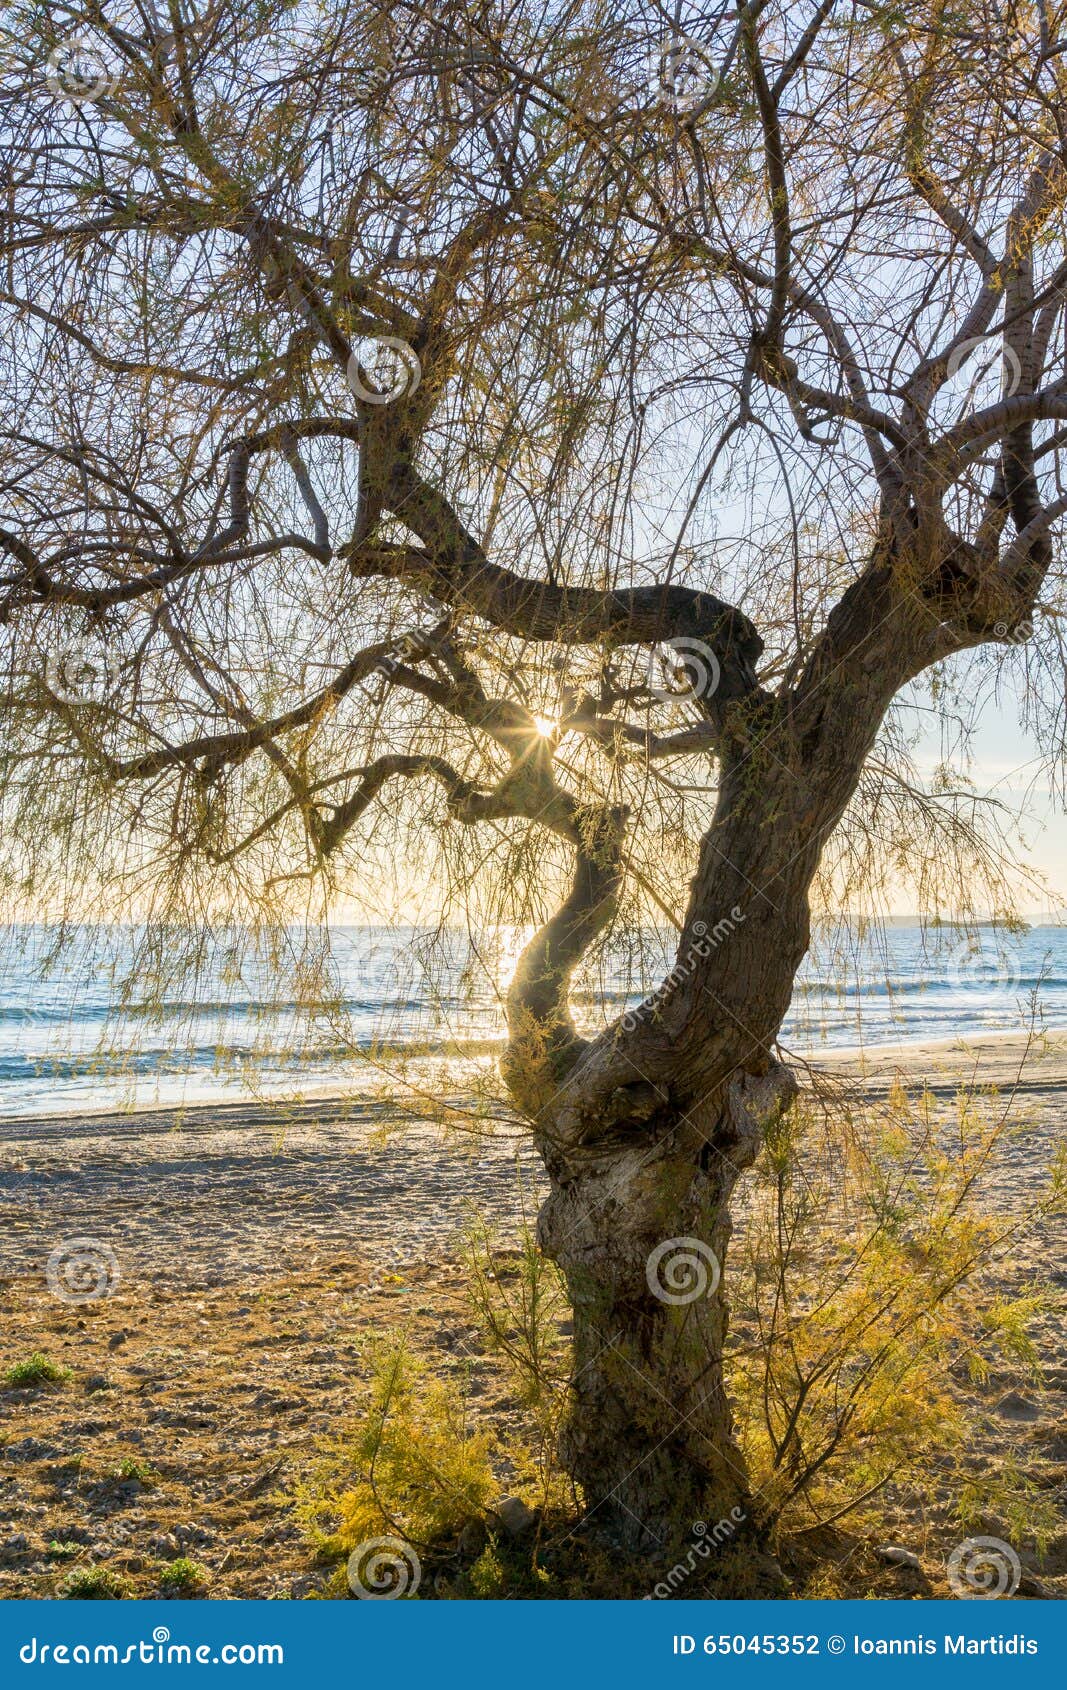 the sea, a lonely tree on the beach at sunrise .evropa, the balkans, greece, attica, athens.